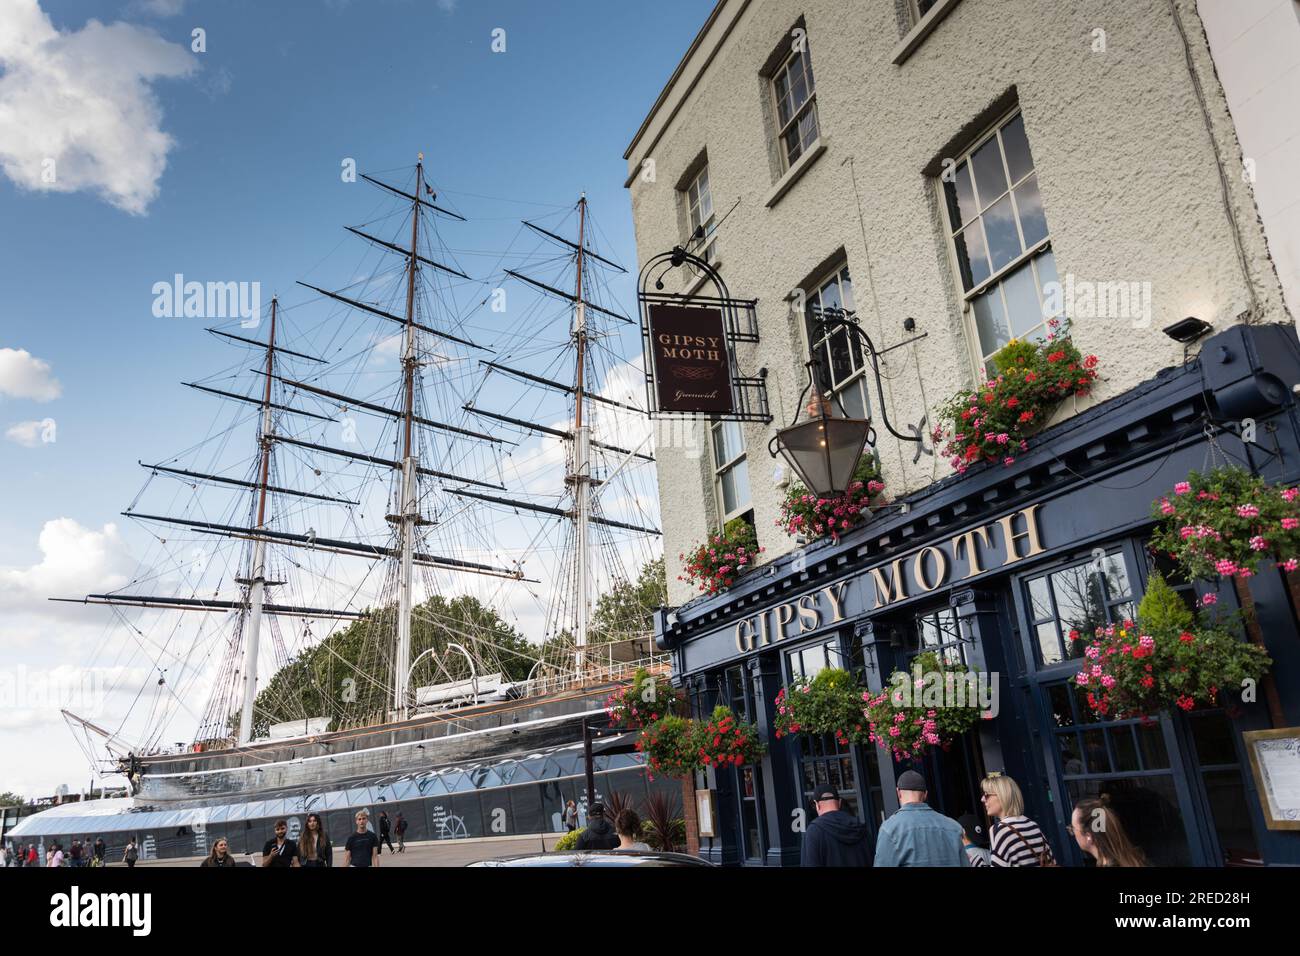 The Gipsy Moth public house next to the magnificent Cutty Sark tea clipper tall ship in Greenwich, London, England, U.K. Stock Photo